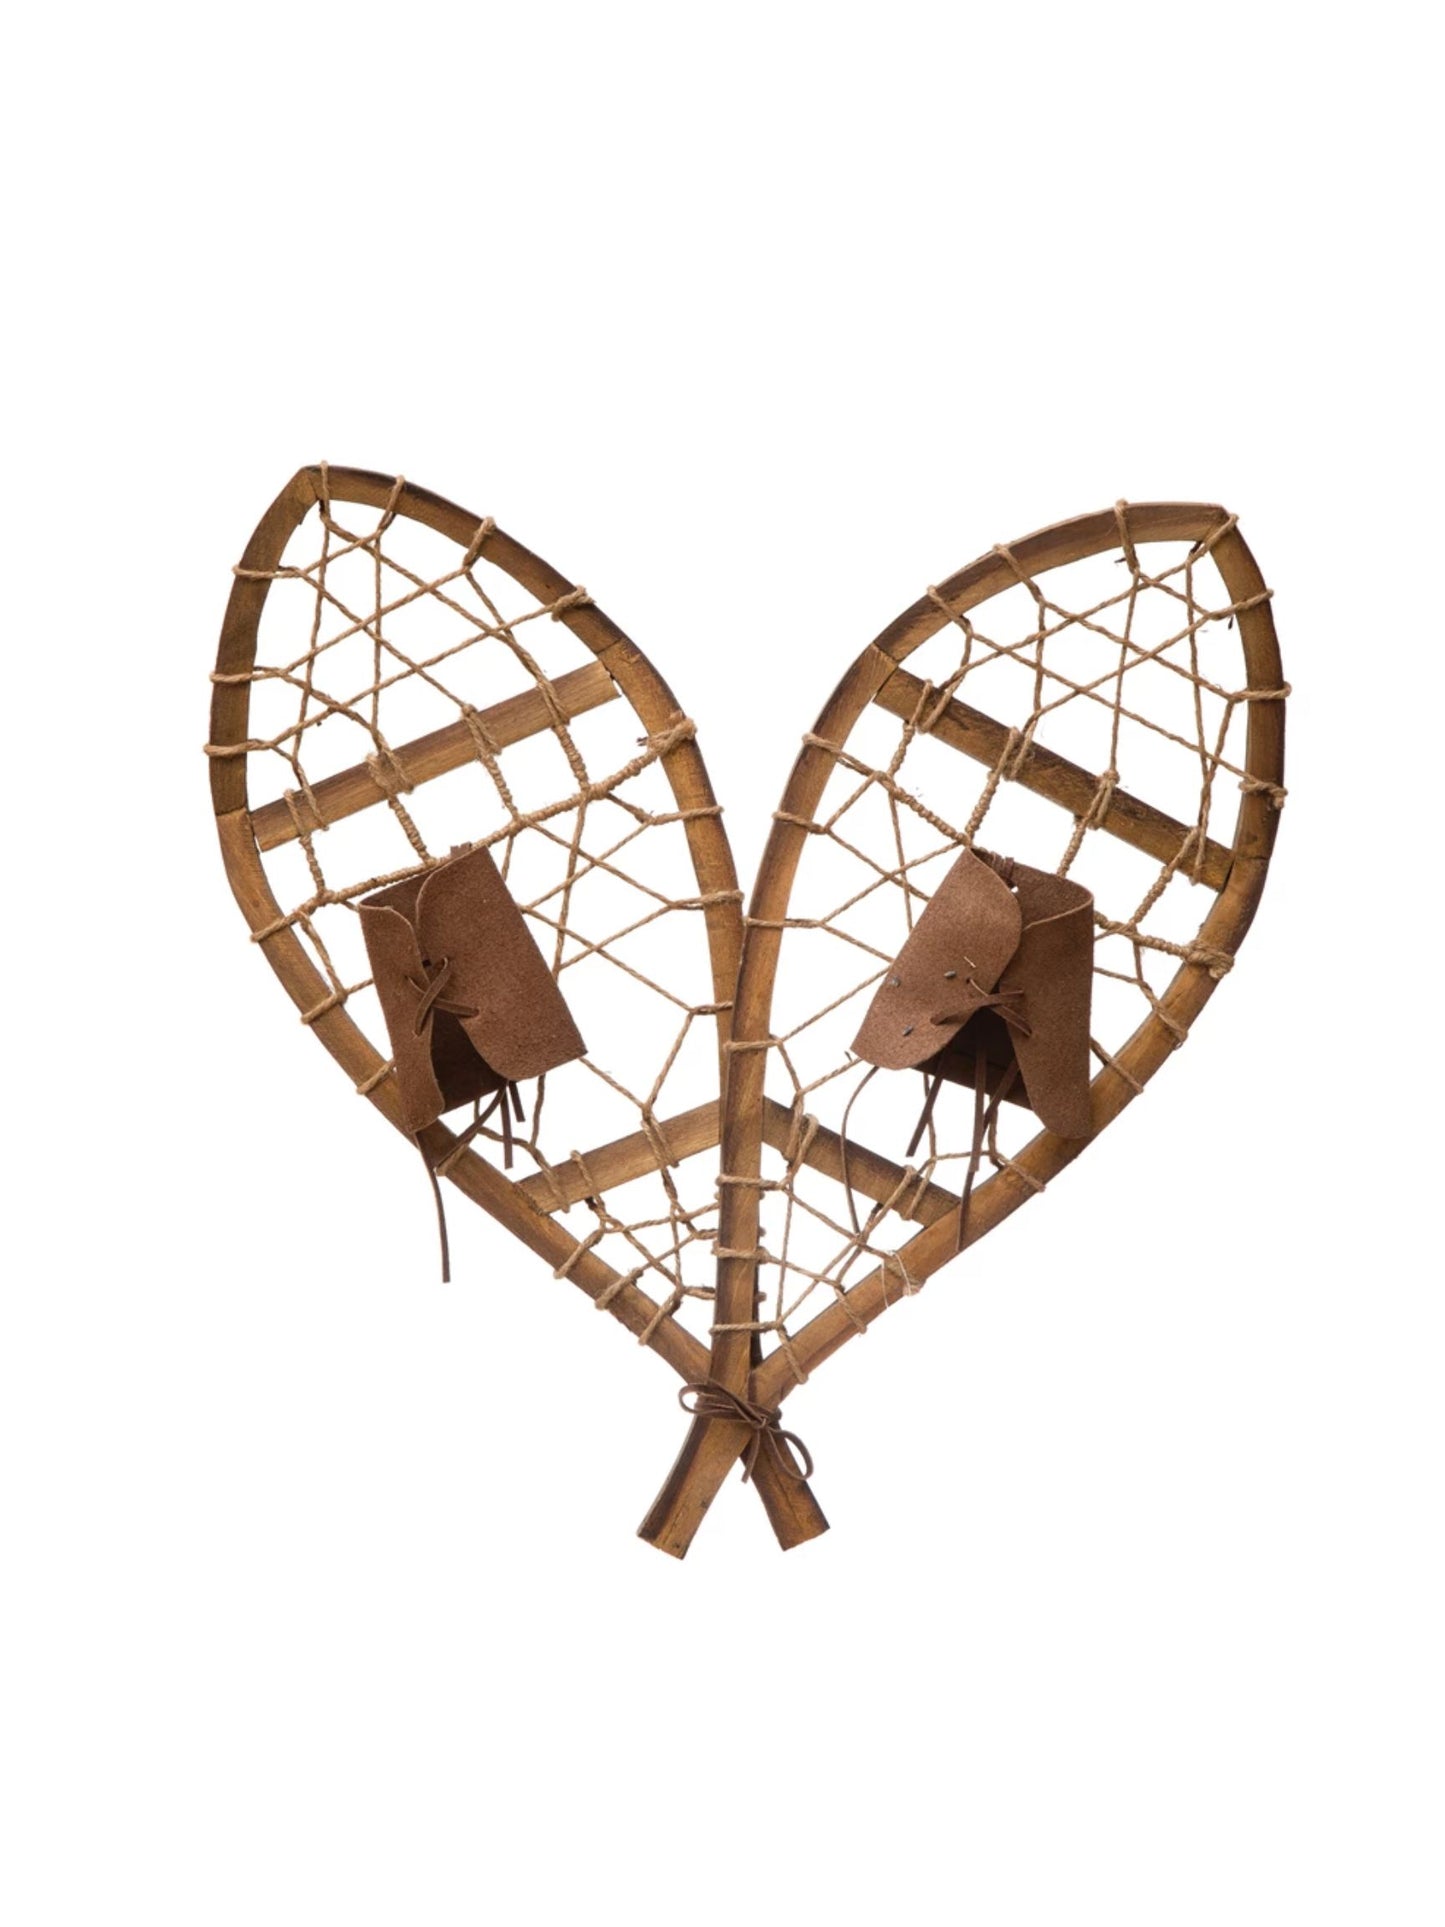 Wood Snowshoes Decor (PICK UP ONLY)